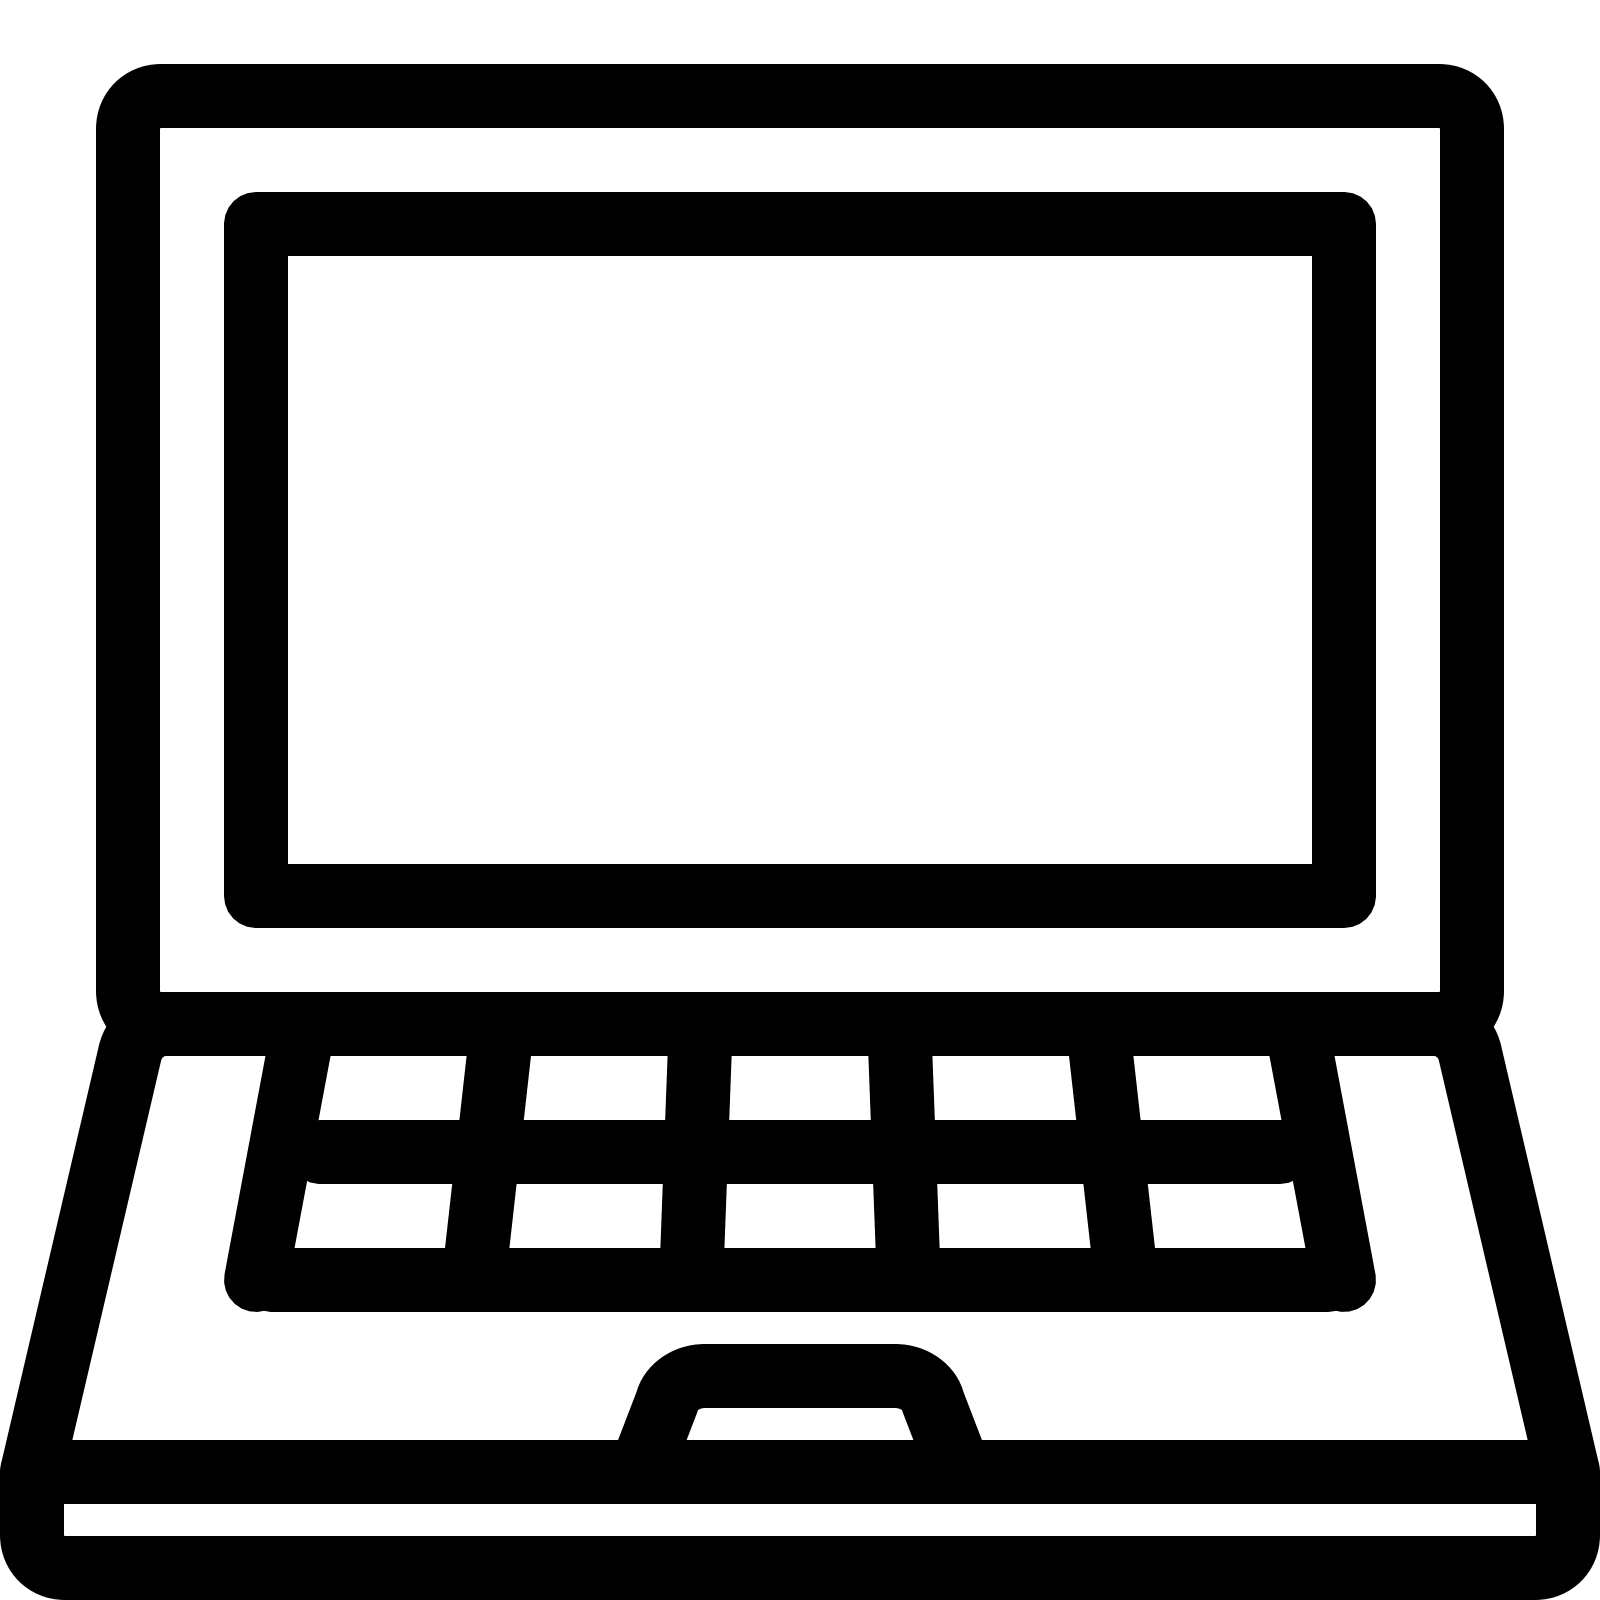 clipart computer black and white